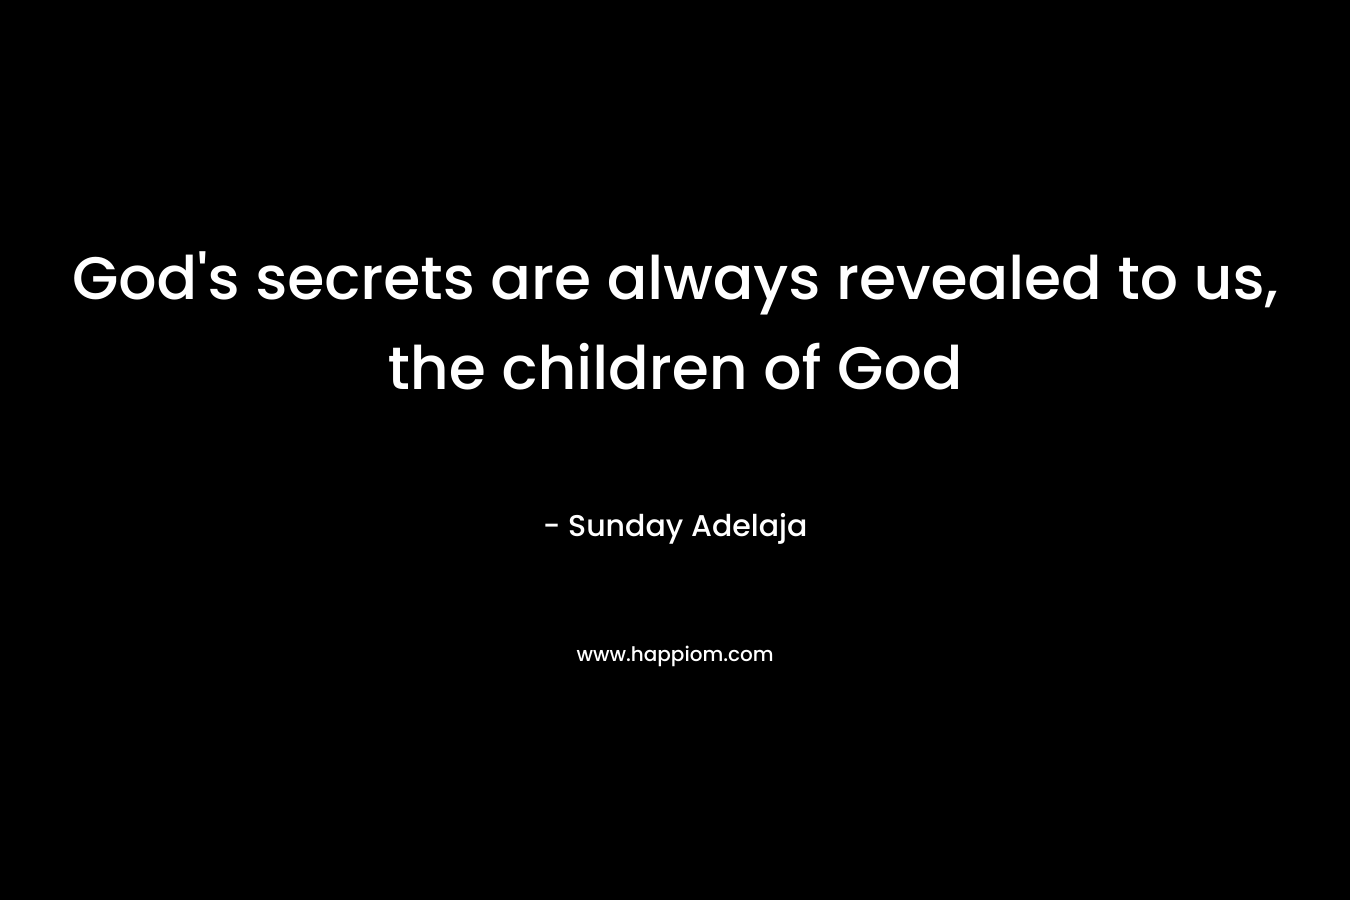 God's secrets are always revealed to us, the children of God